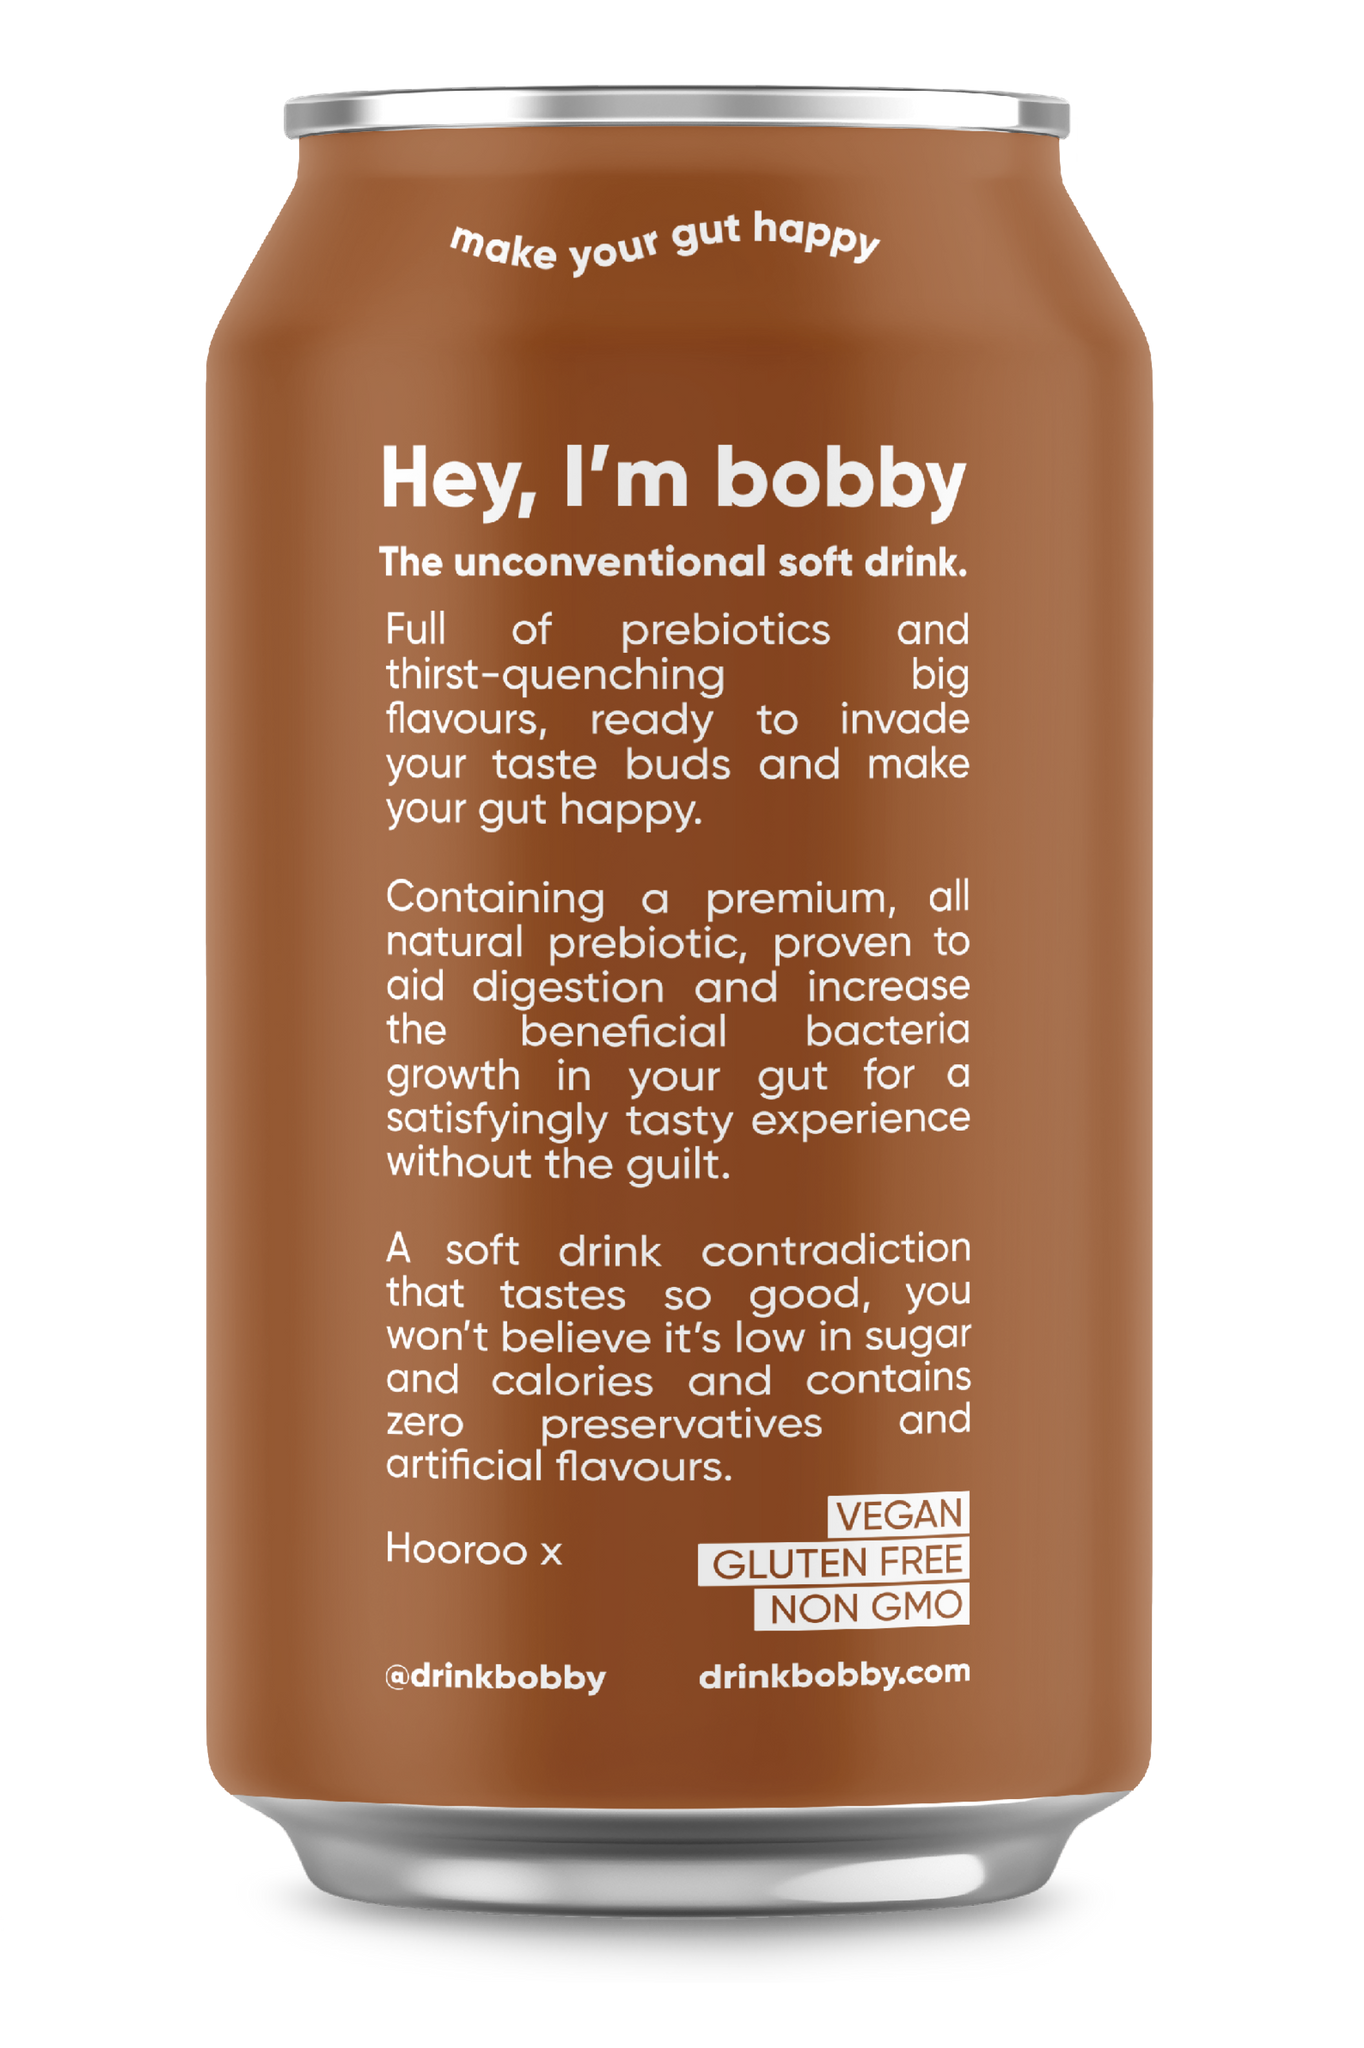 Hey, I'm Bobby. The unconventional soda. Full of prebiotics and delicious flavours, ready to invade your taste buds and help your gut be happy.